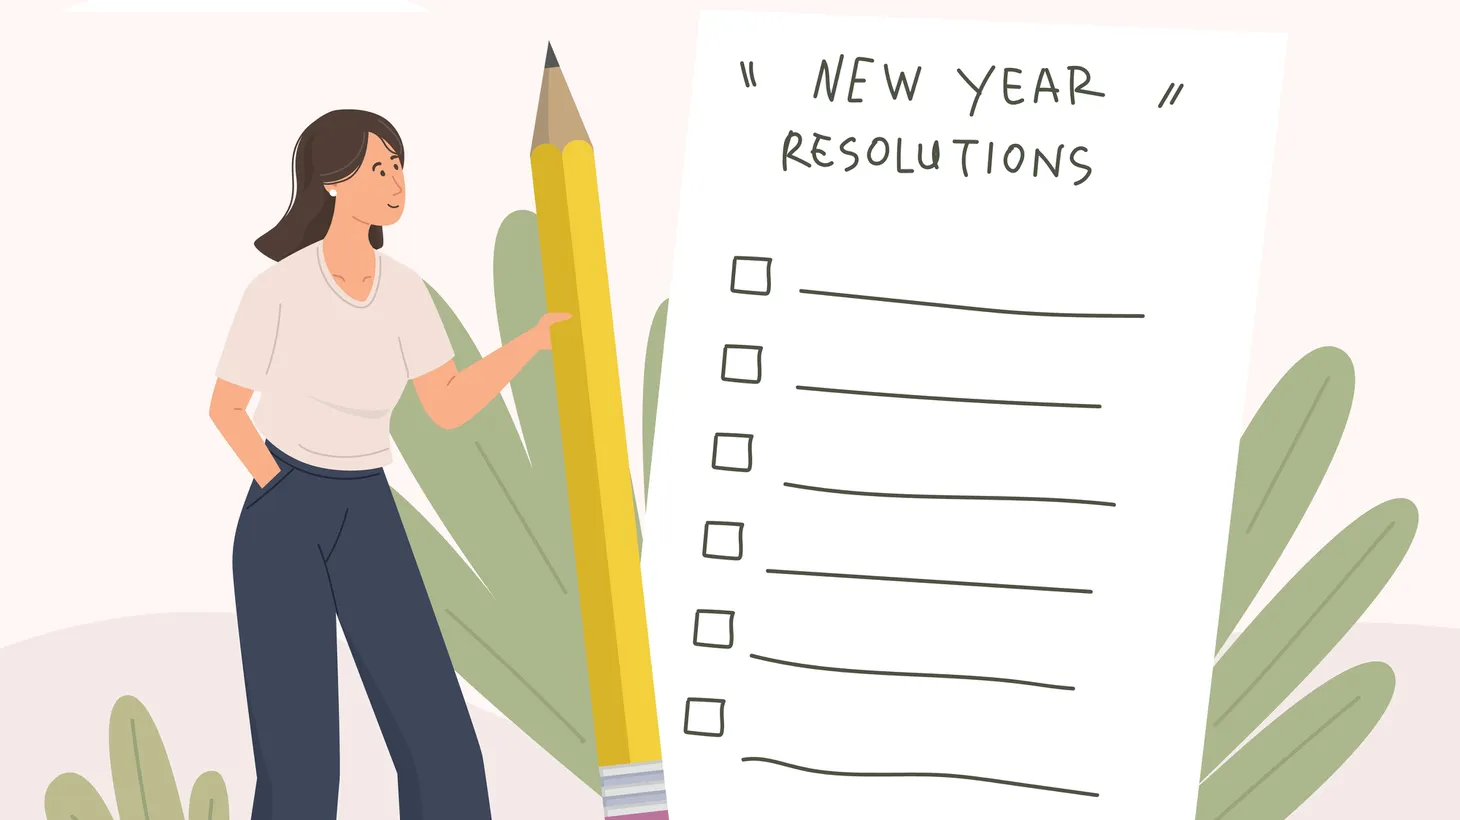 “When at New Years you make a resolution and have this burst of enthusiasm, the research shows that the more you repeat, the more it becomes ingrained and starts to feel automatic,” says behavioral scientist Katy Milkman. “So celebrate the successes, repeat when you have those bursts of energy as much as you can, because that's how you get the carryover.”